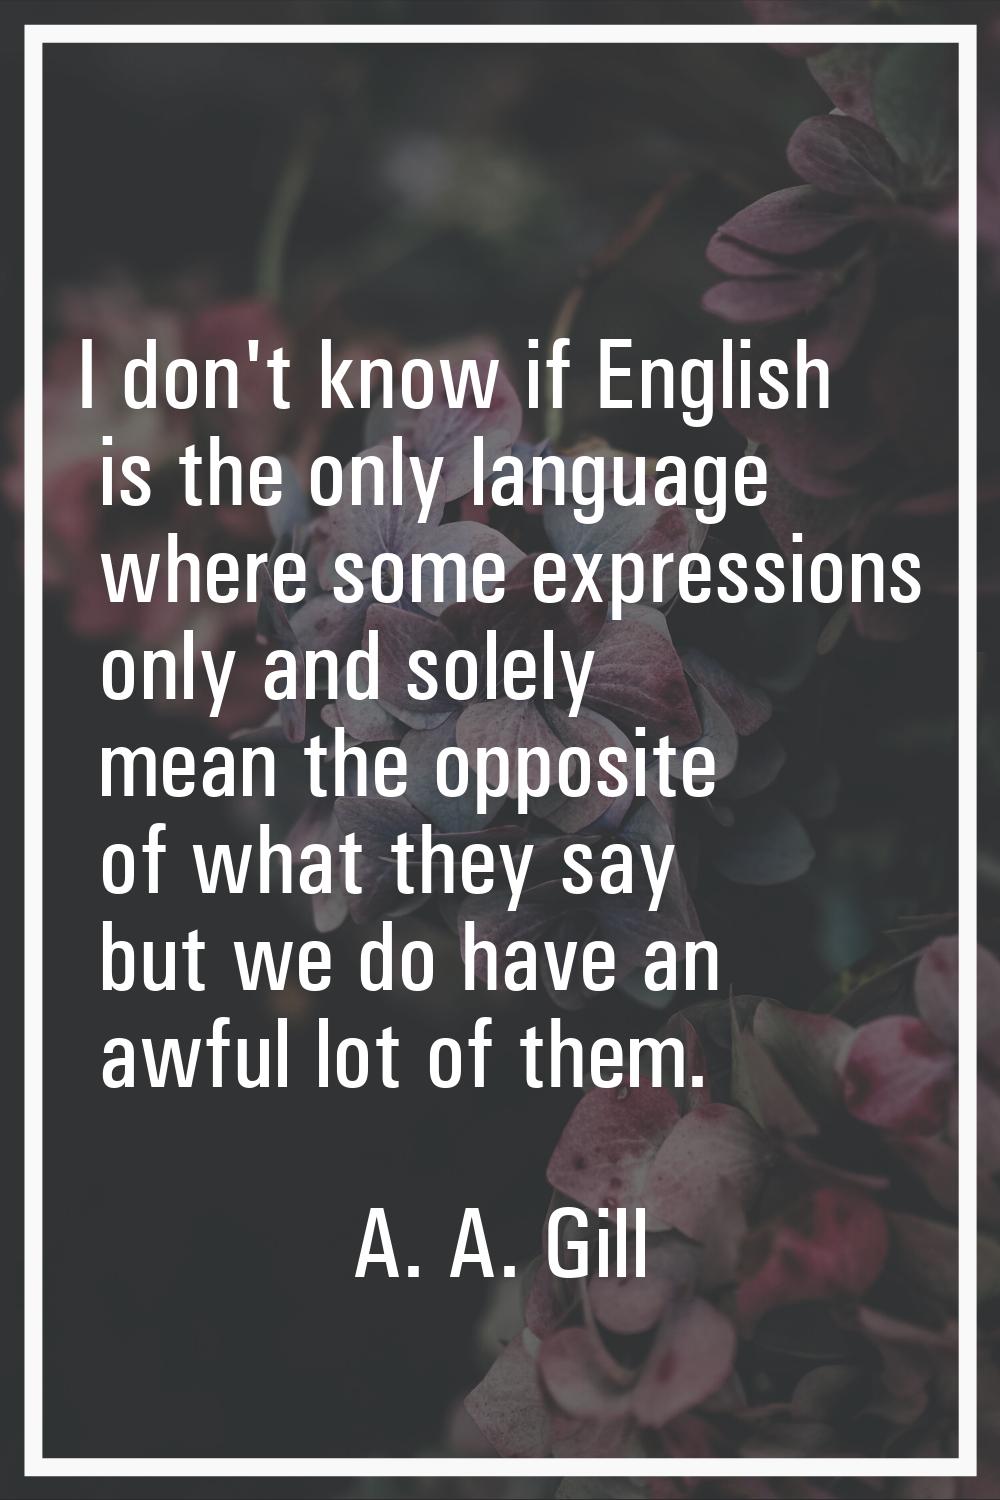 I don't know if English is the only language where some expressions only and solely mean the opposi